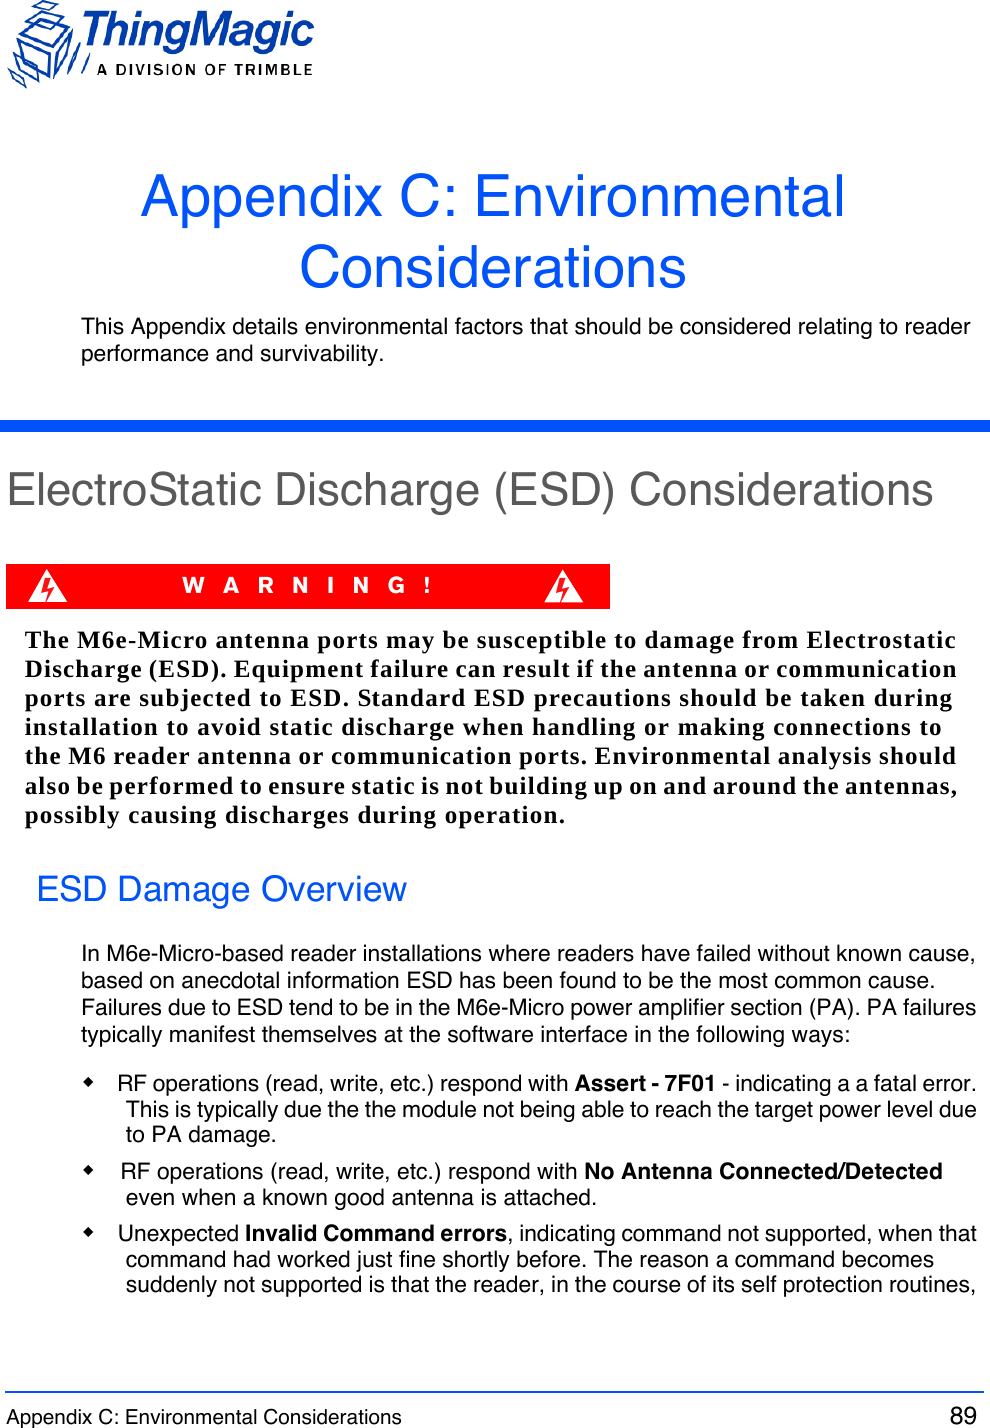 Appendix C: Environmental Considerations  89 Appendix C: Environmental ConsiderationsThis Appendix details environmental factors that should be considered relating to reader performance and survivability.ElectroStatic Discharge (ESD) ConsiderationsWARNING!The M6e-Micro antenna ports may be susceptible to damage from Electrostatic Discharge (ESD). Equipment failure can result if the antenna or communication ports are subjected to ESD. Standard ESD precautions should be taken during installation to avoid static discharge when handling or making connections to the M6 reader antenna or communication ports. Environmental analysis should also be performed to ensure static is not building up on and around the antennas, possibly causing discharges during operation.ESD Damage OverviewIn M6e-Micro-based reader installations where readers have failed without known cause, based on anecdotal information ESD has been found to be the most common cause. Failures due to ESD tend to be in the M6e-Micro power amplifier section (PA). PA failures typically manifest themselves at the software interface in the following ways:RF operations (read, write, etc.) respond with Assert - 7F01 - indicating a a fatal error. This is typically due the the module not being able to reach the target power level due to PA damage.RF operations (read, write, etc.) respond with No Antenna Connected/Detected even when a known good antenna is attached. Unexpected Invalid Command errors, indicating command not supported, when that command had worked just fine shortly before. The reason a command becomes suddenly not supported is that the reader, in the course of its self protection routines, 